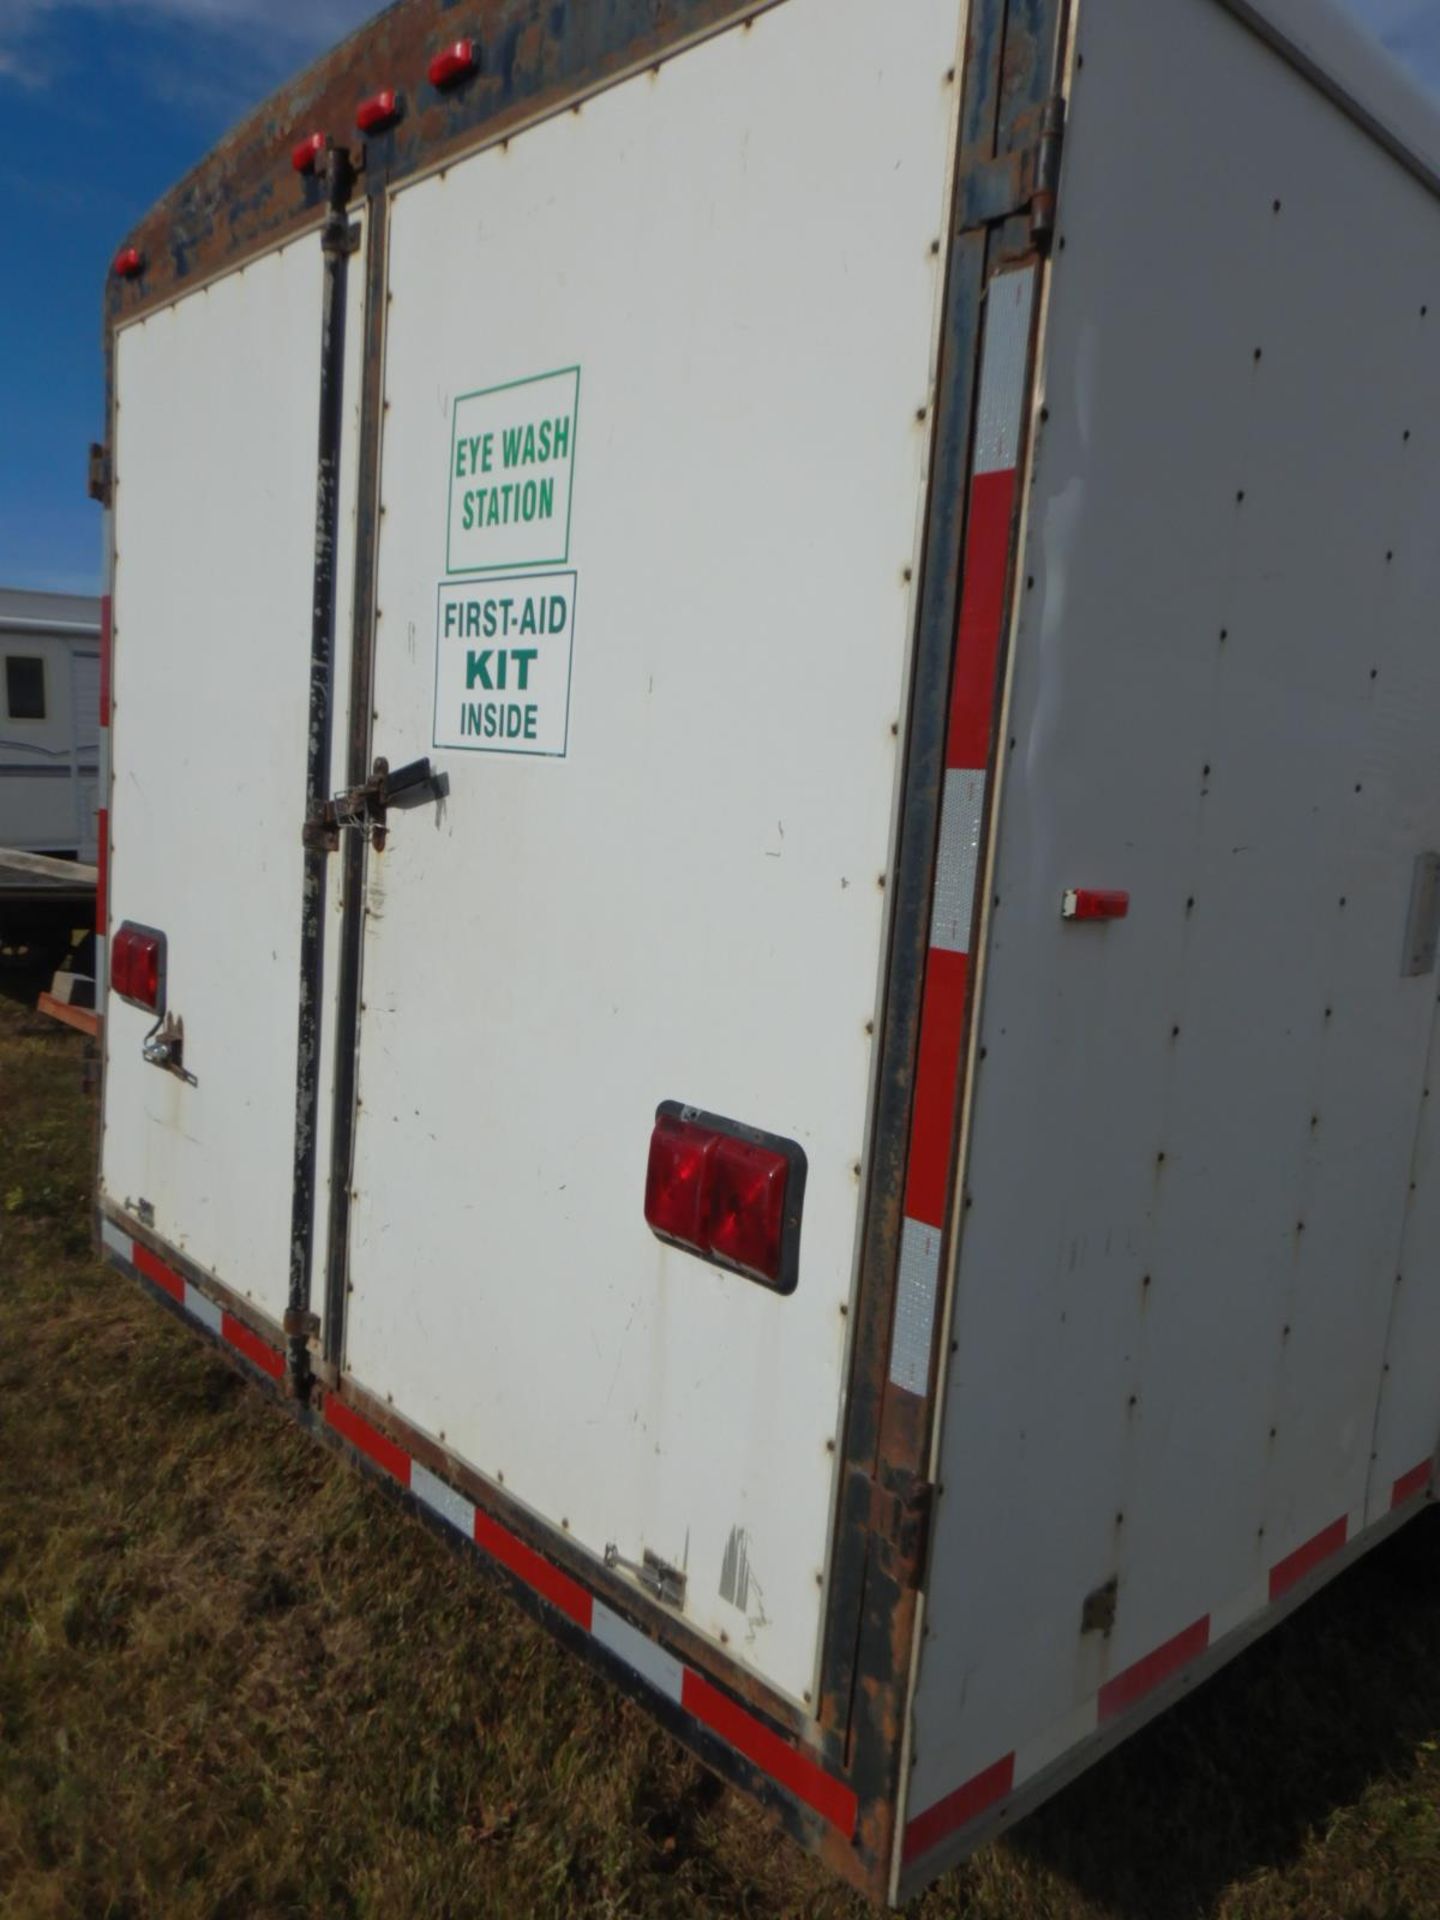 2004 20FTX8FT ENCLOSED TRAILER, T/A, GVWR 6350KG, BARN DOORS, S/N FC200418 - Image 5 of 6